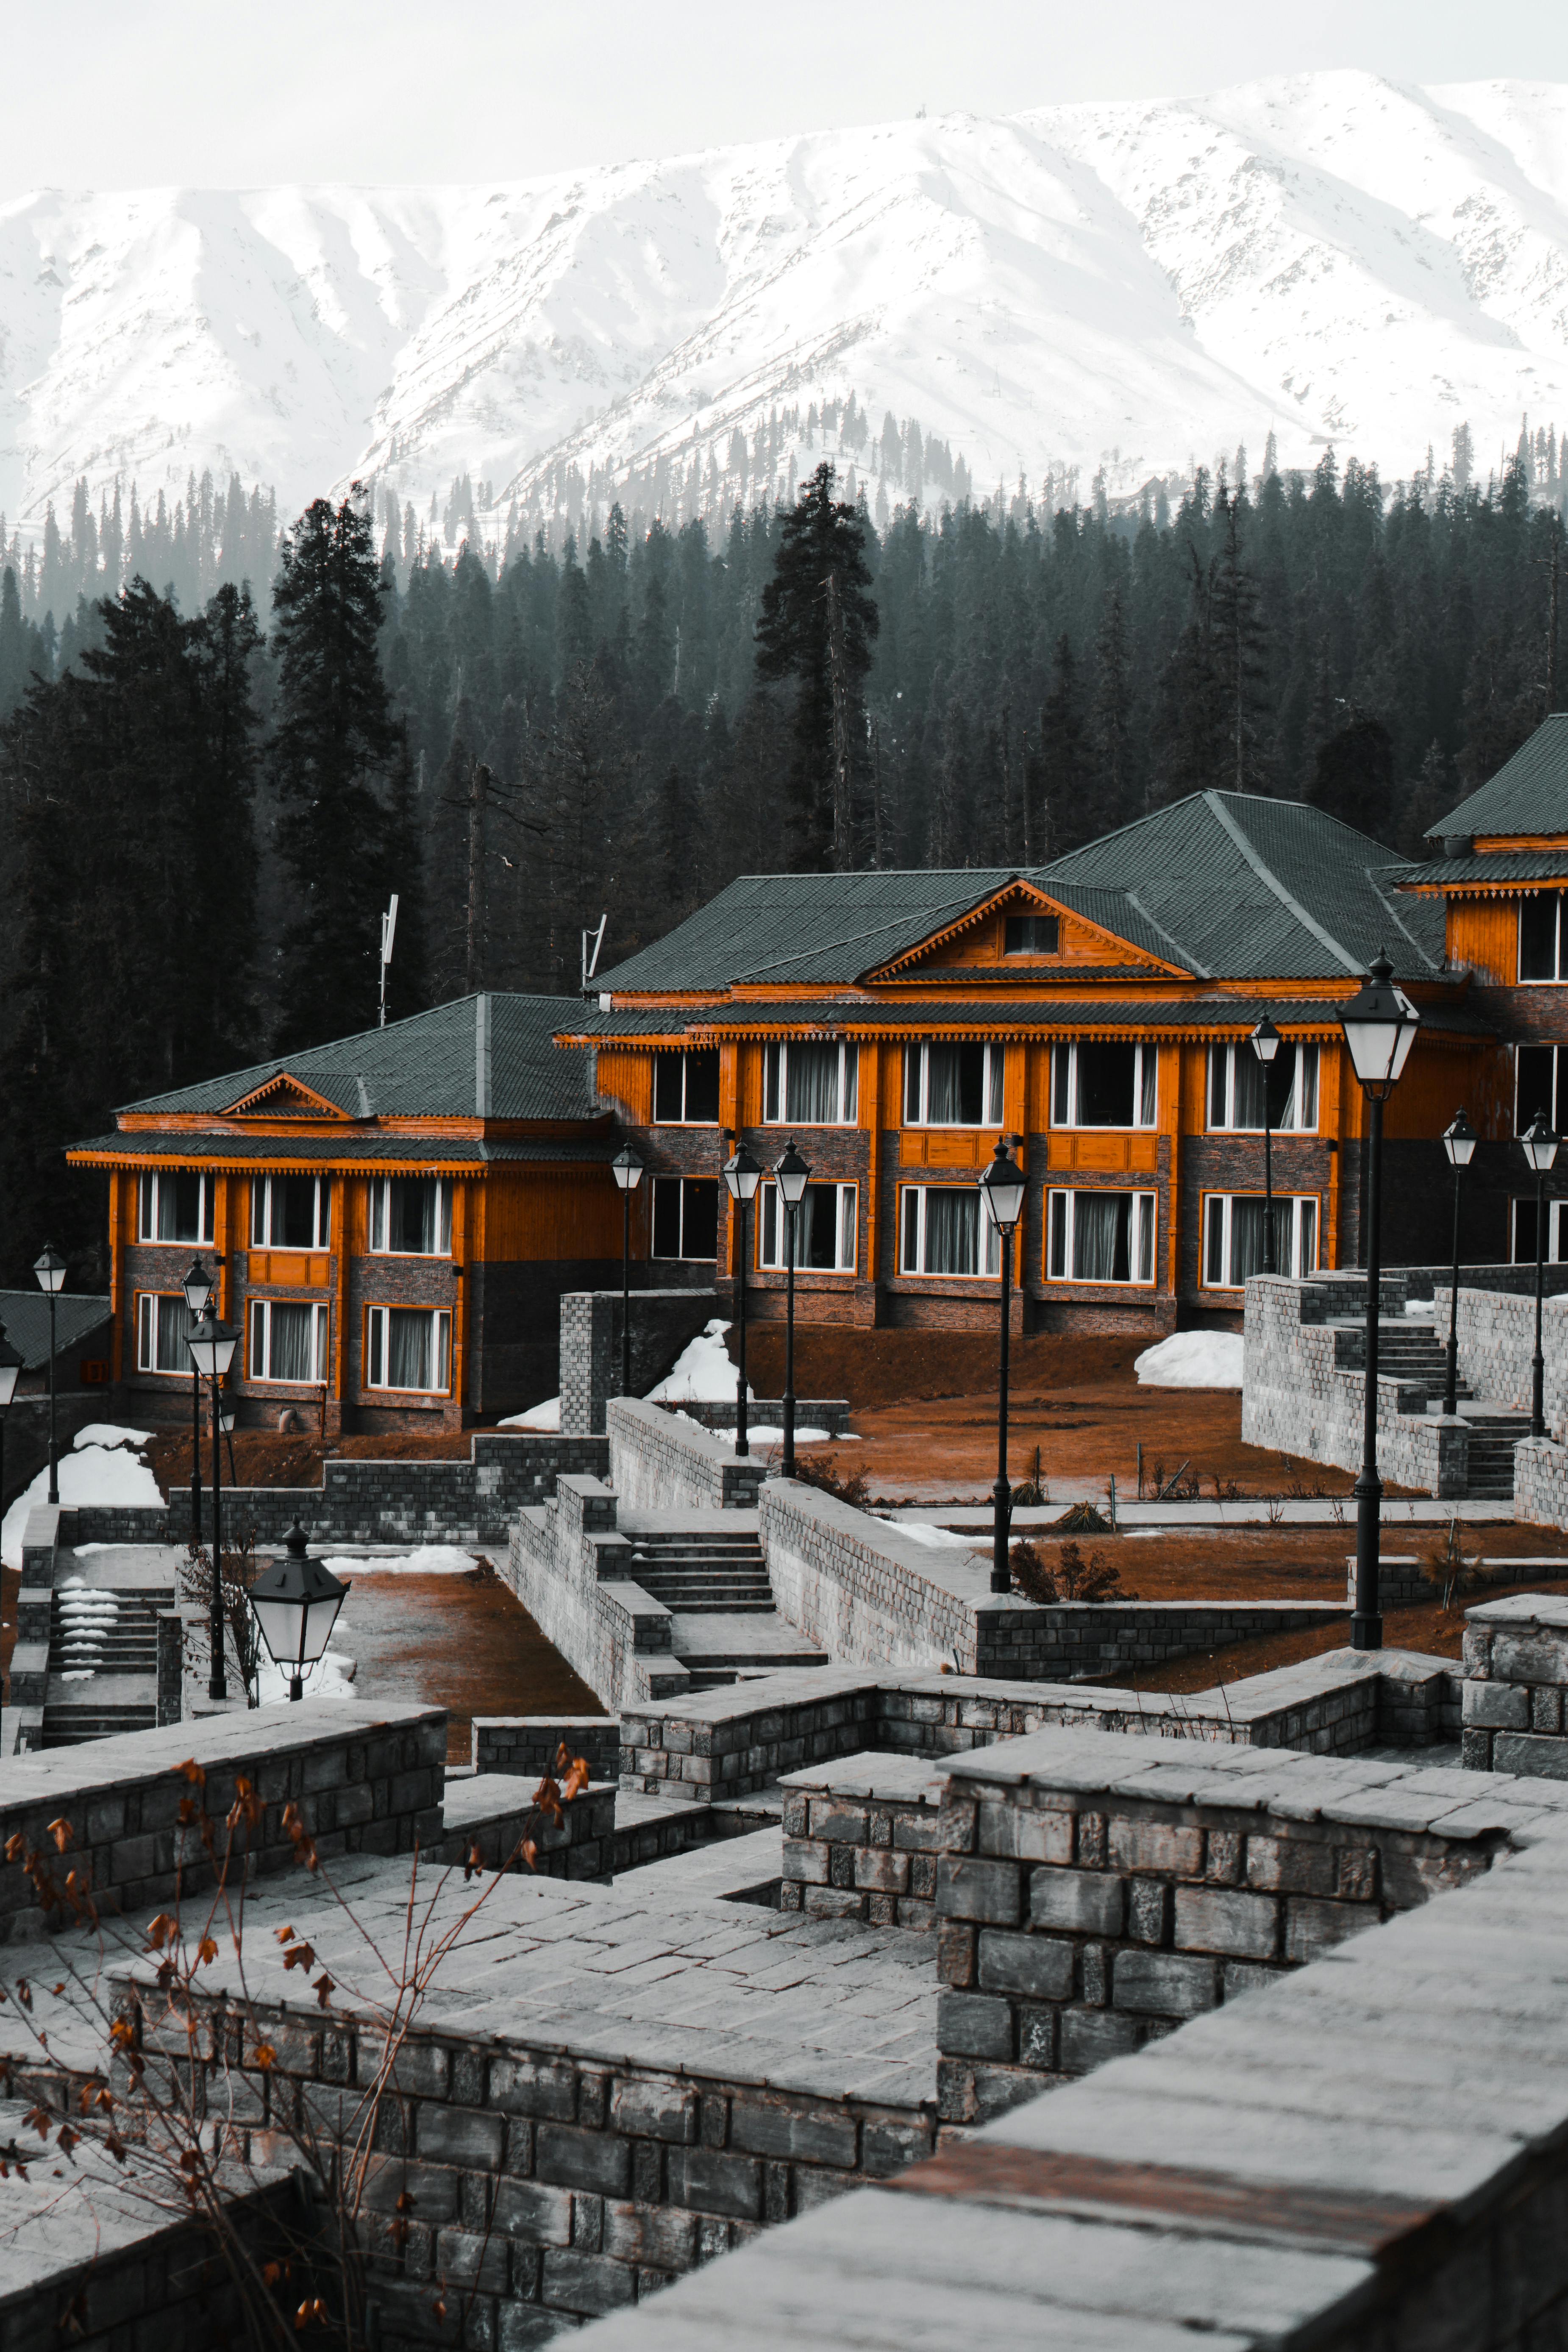 Choosing a Ski Resort Lodge: Tips for a Cozy and Affordable Stay